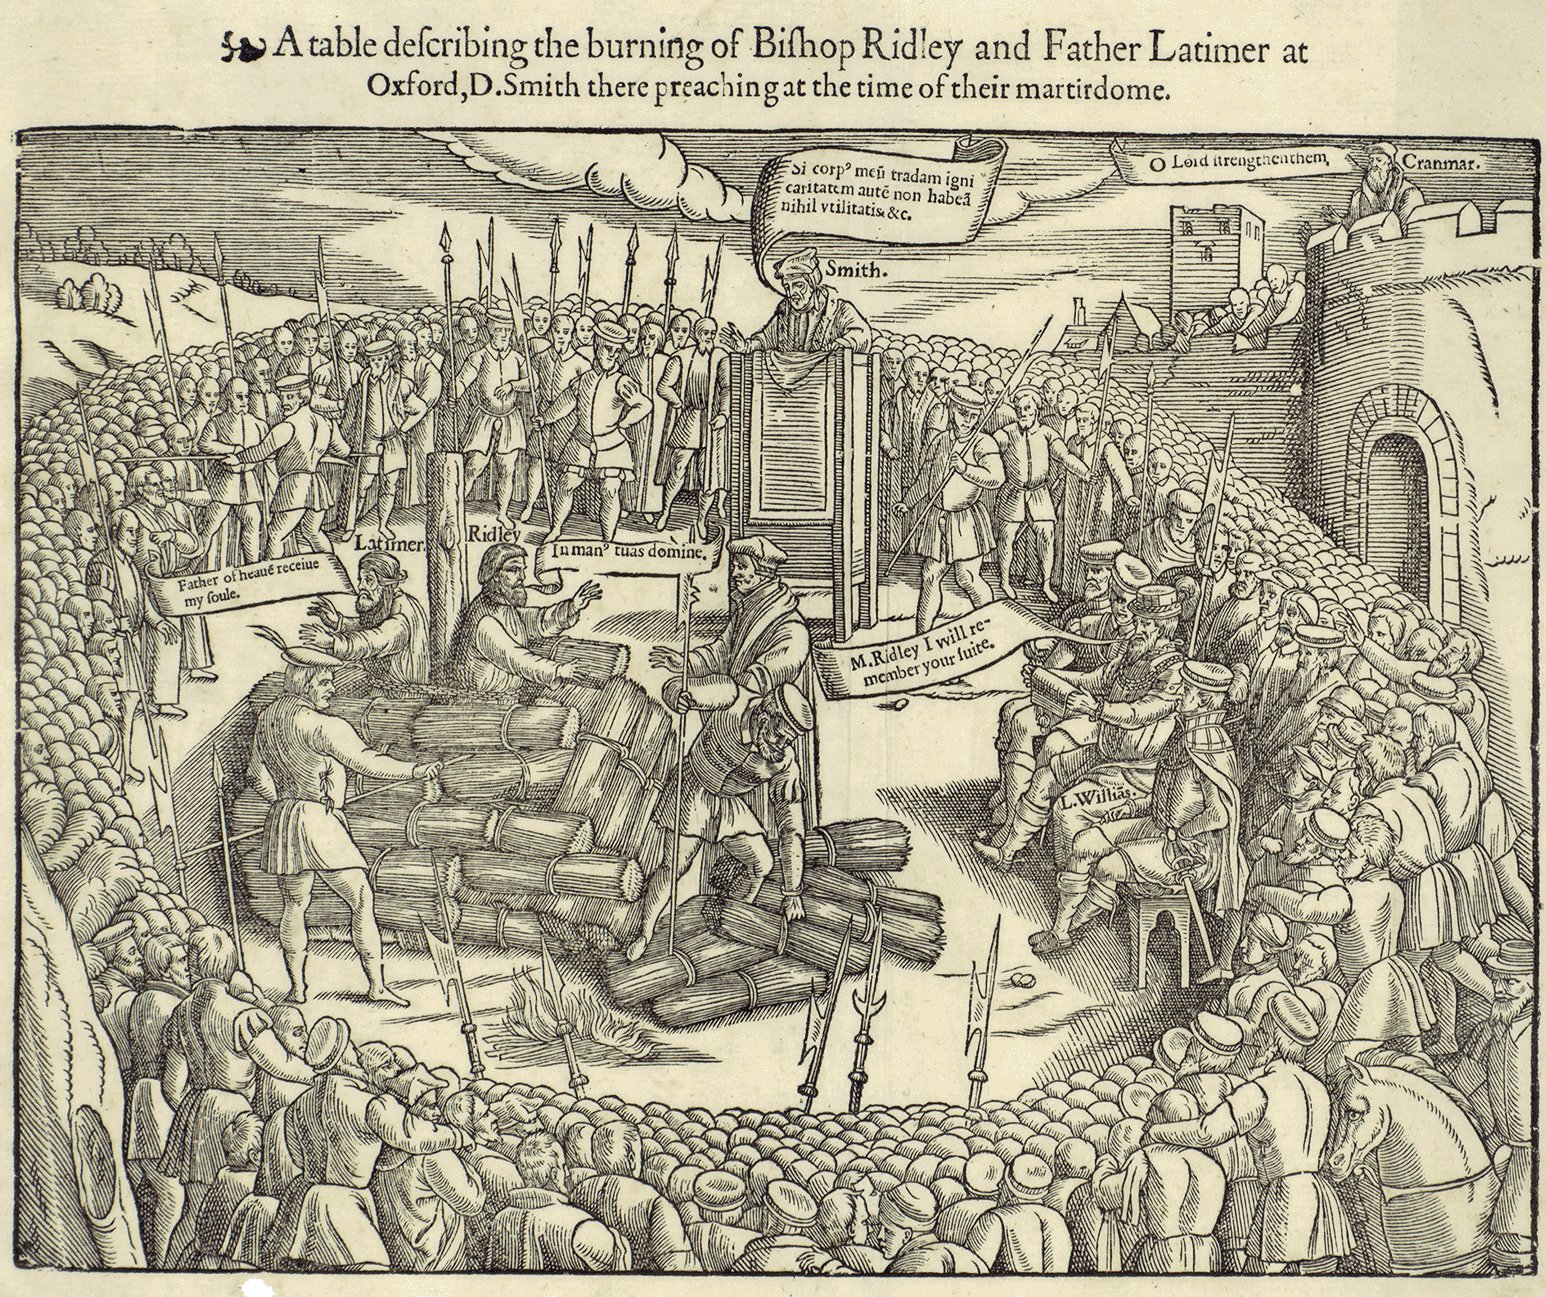 burning of ridley and latimer - 5 A table decribing the burning of Bihop Ridley and Father Latimer at Oxford,D.Smith there preaching at the time of their martirdome. p ada Larghe while on la Smith